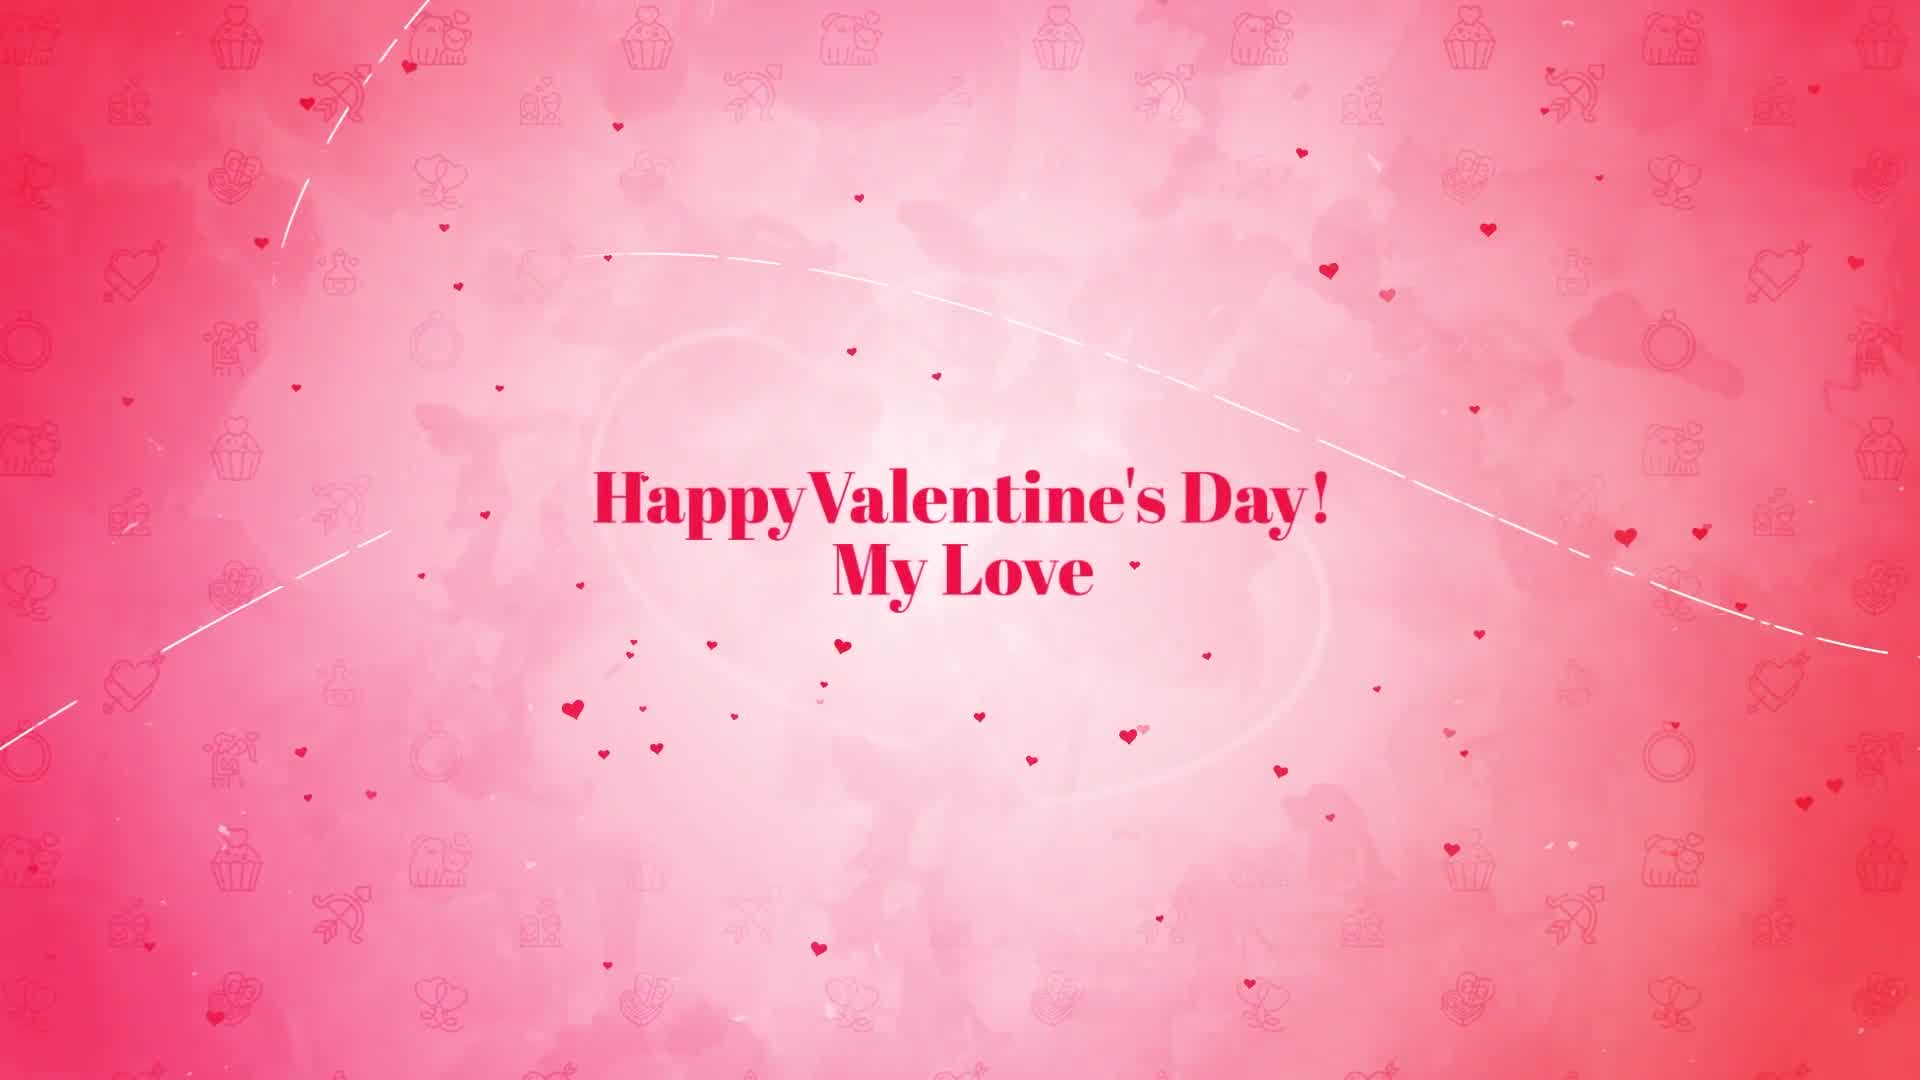 Valentines Day Images, Pictures and Photos Free Download  Happy valentines  day pictures, Happy valentines day photos, Happy valentines day wishes